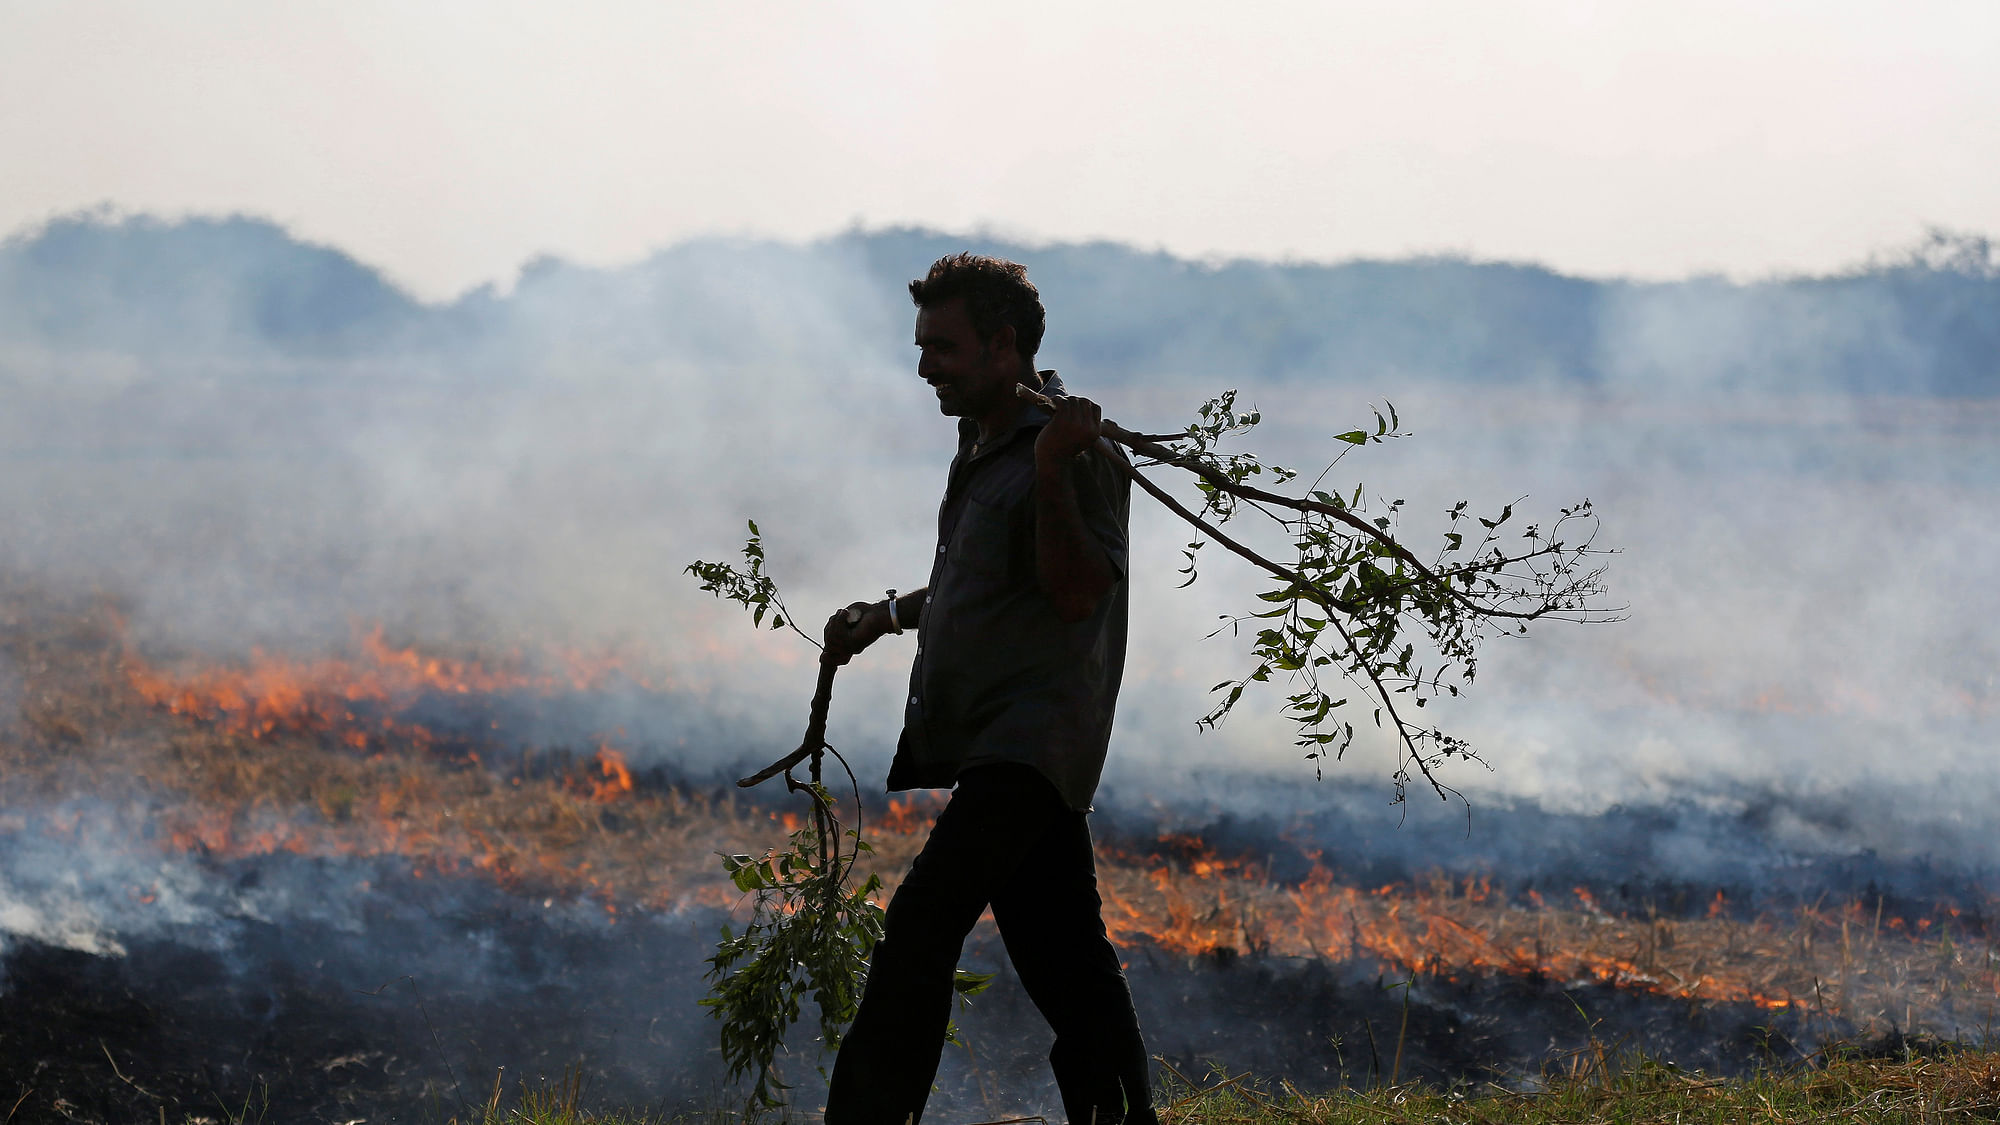 A farmer burns his the stubble left behind after harvesting crops.